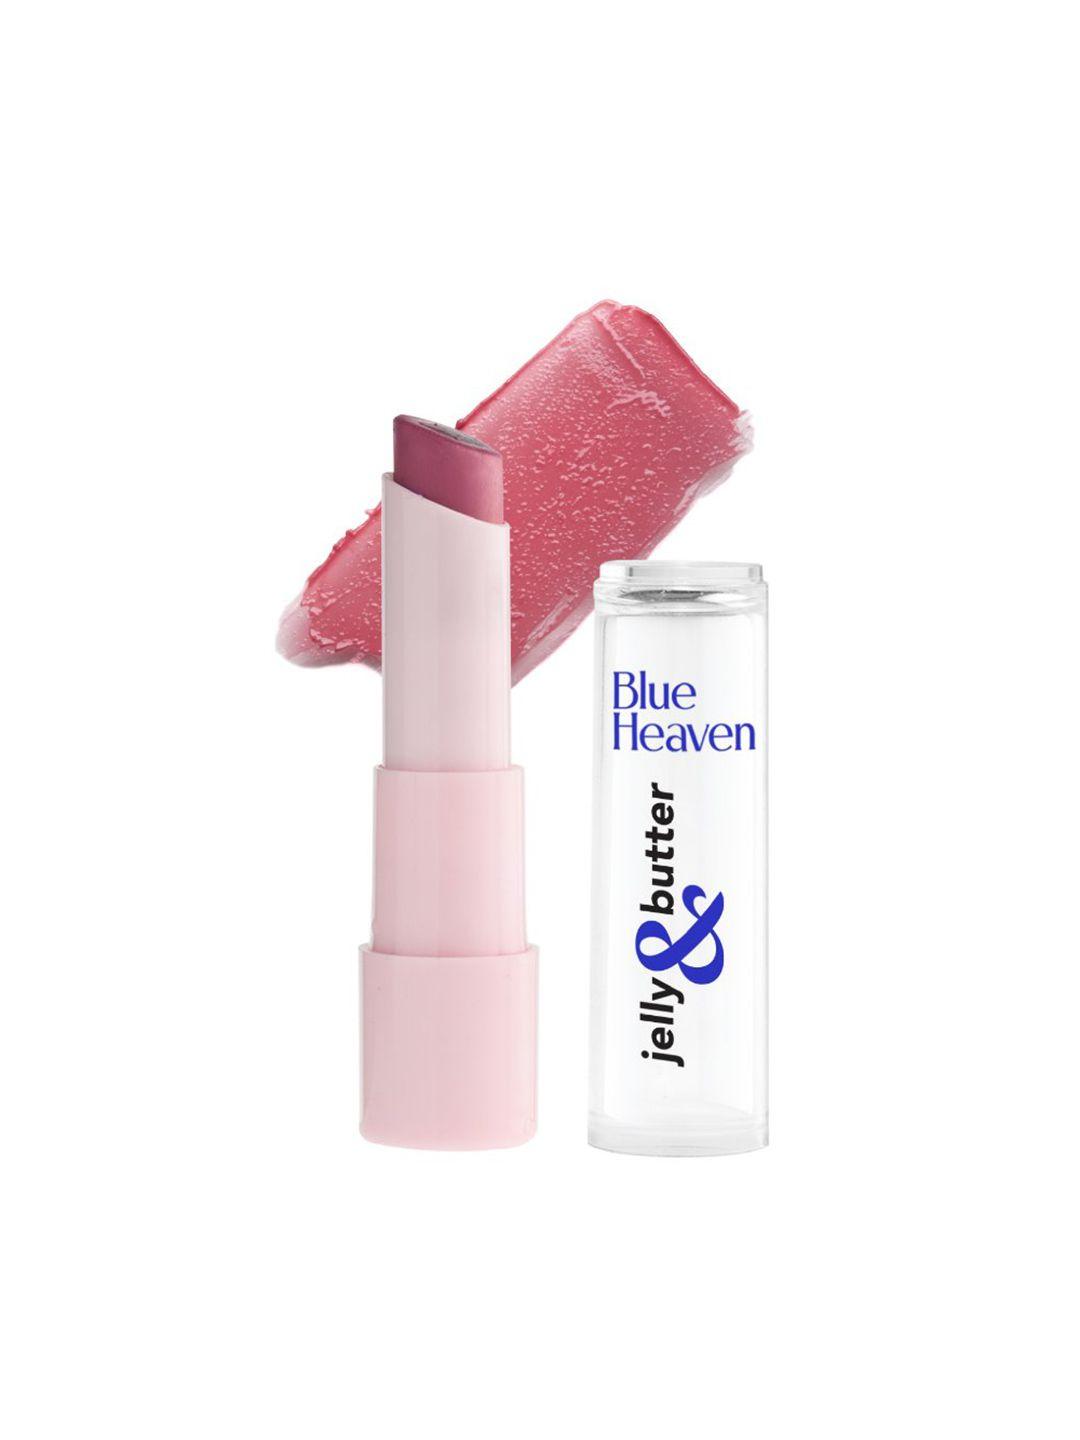 Blue Heaven Jelly & Butter Hydrating Lip Balm with Shea Butter & Vitamin E - Dusty Rose